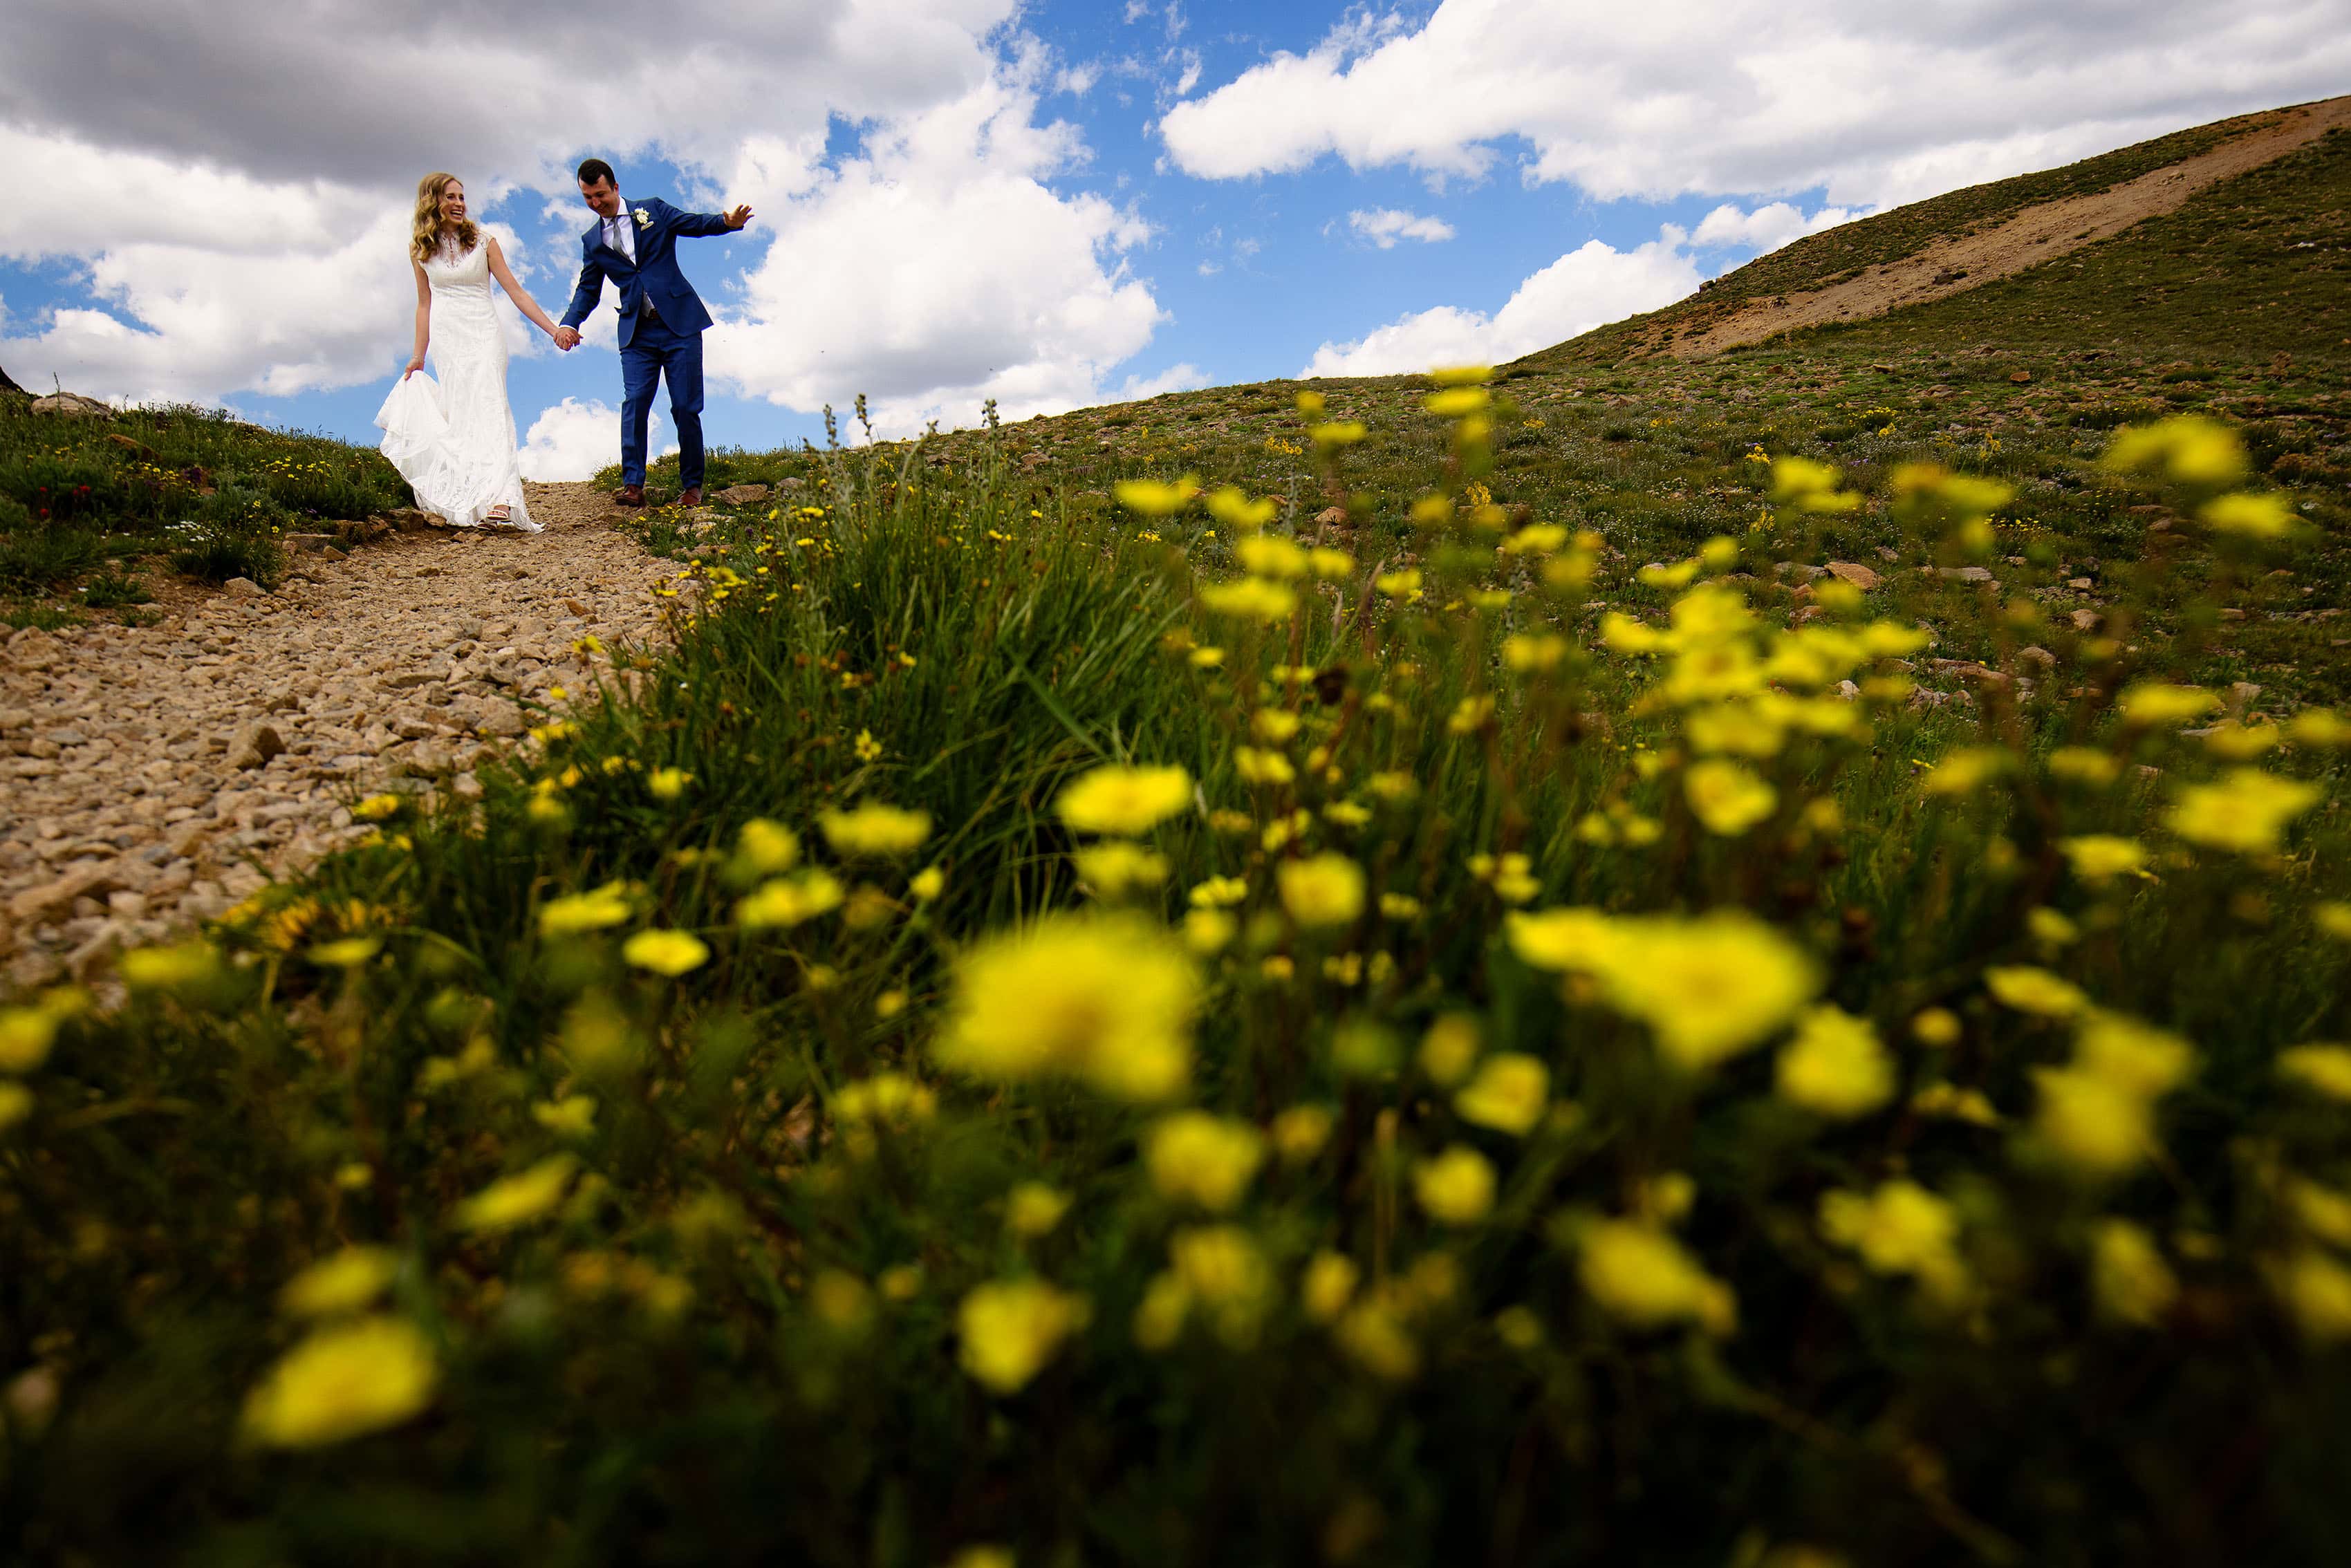 Steven looses his footing while walking down a slope with Keely on Loveland Pass